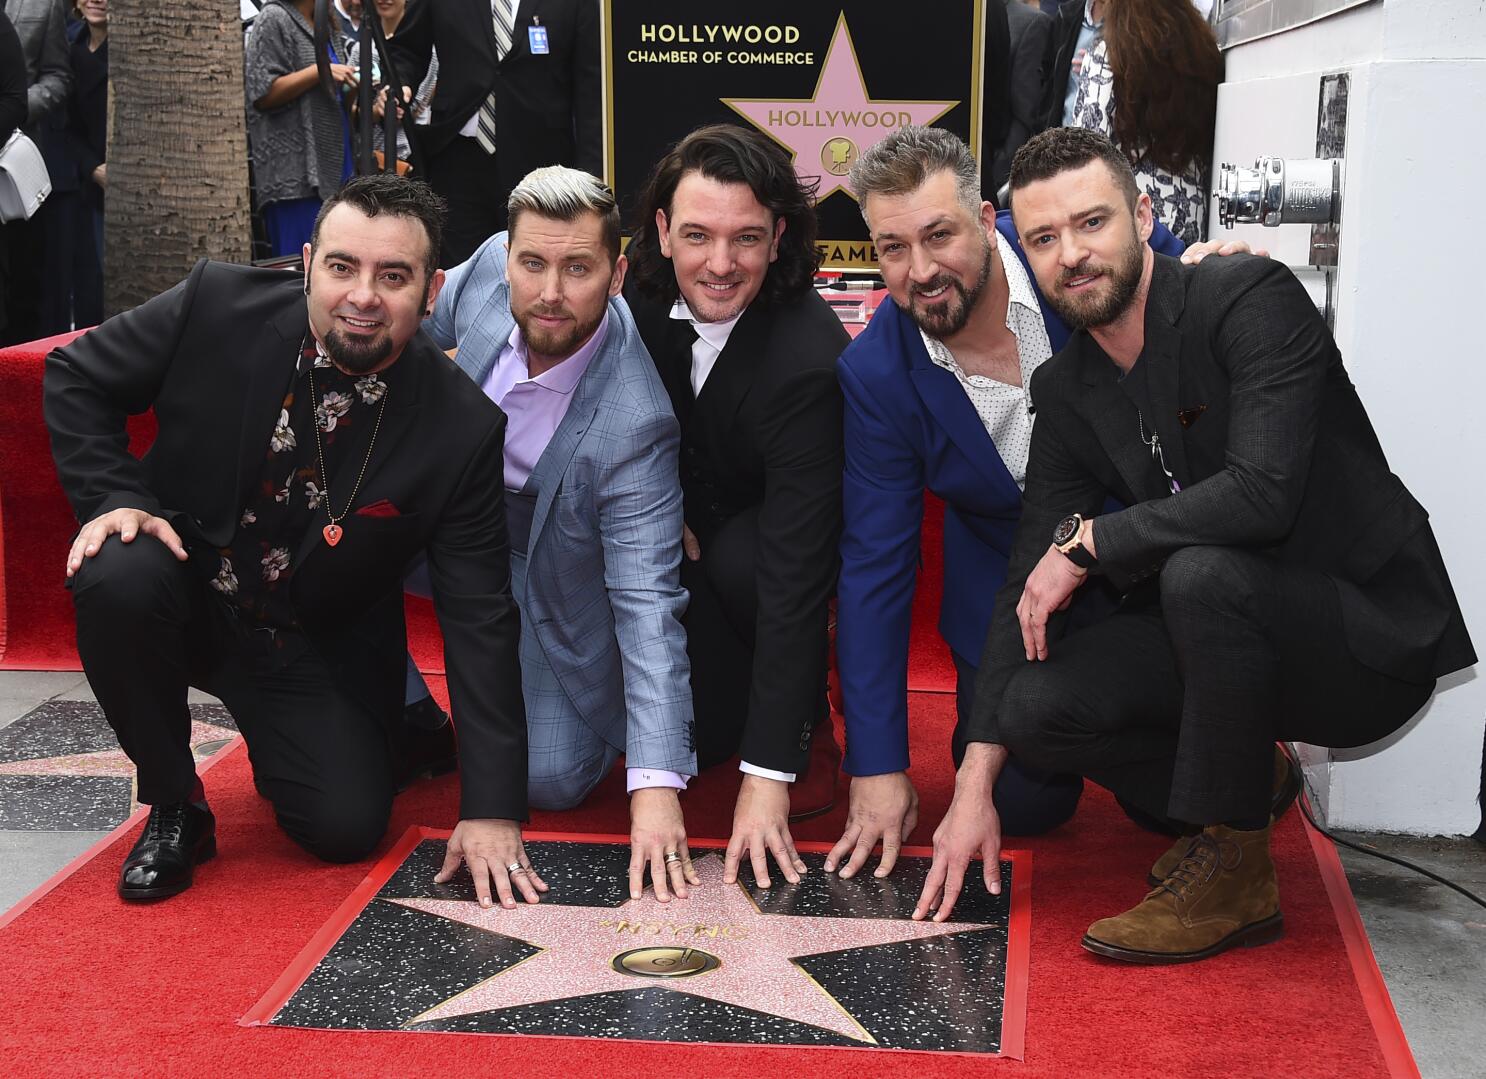 NSYNC isn't going on tour, but Justin Timberlake is